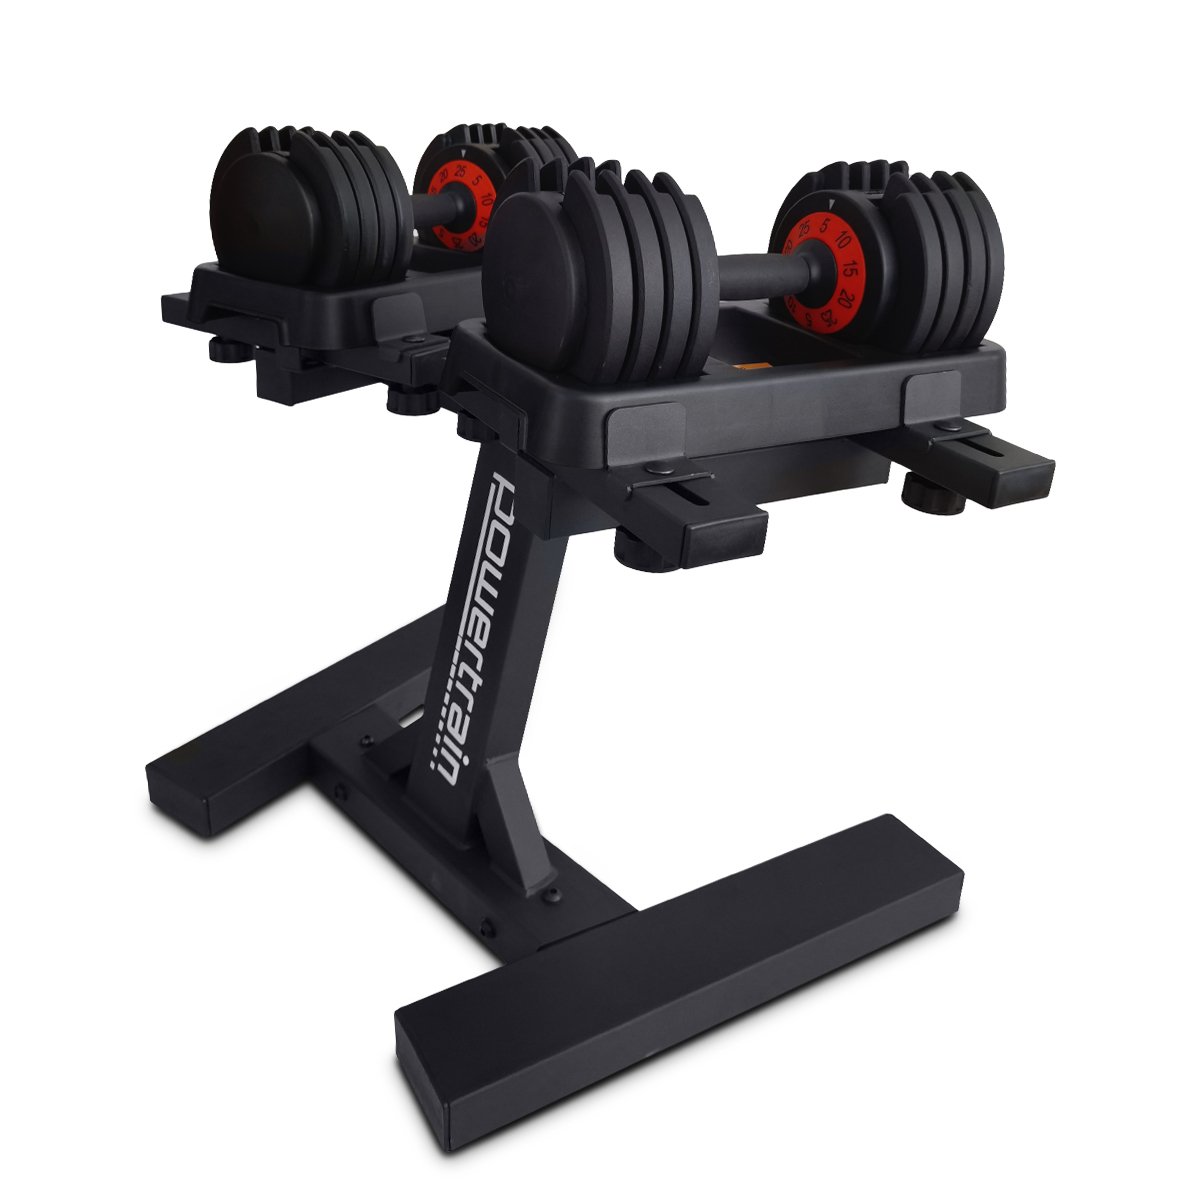 Powertrain GEN2 Pro Adjustable Dumbbell Set - 2 x 25kg (50kg) Home Gym Weights with Stand 2